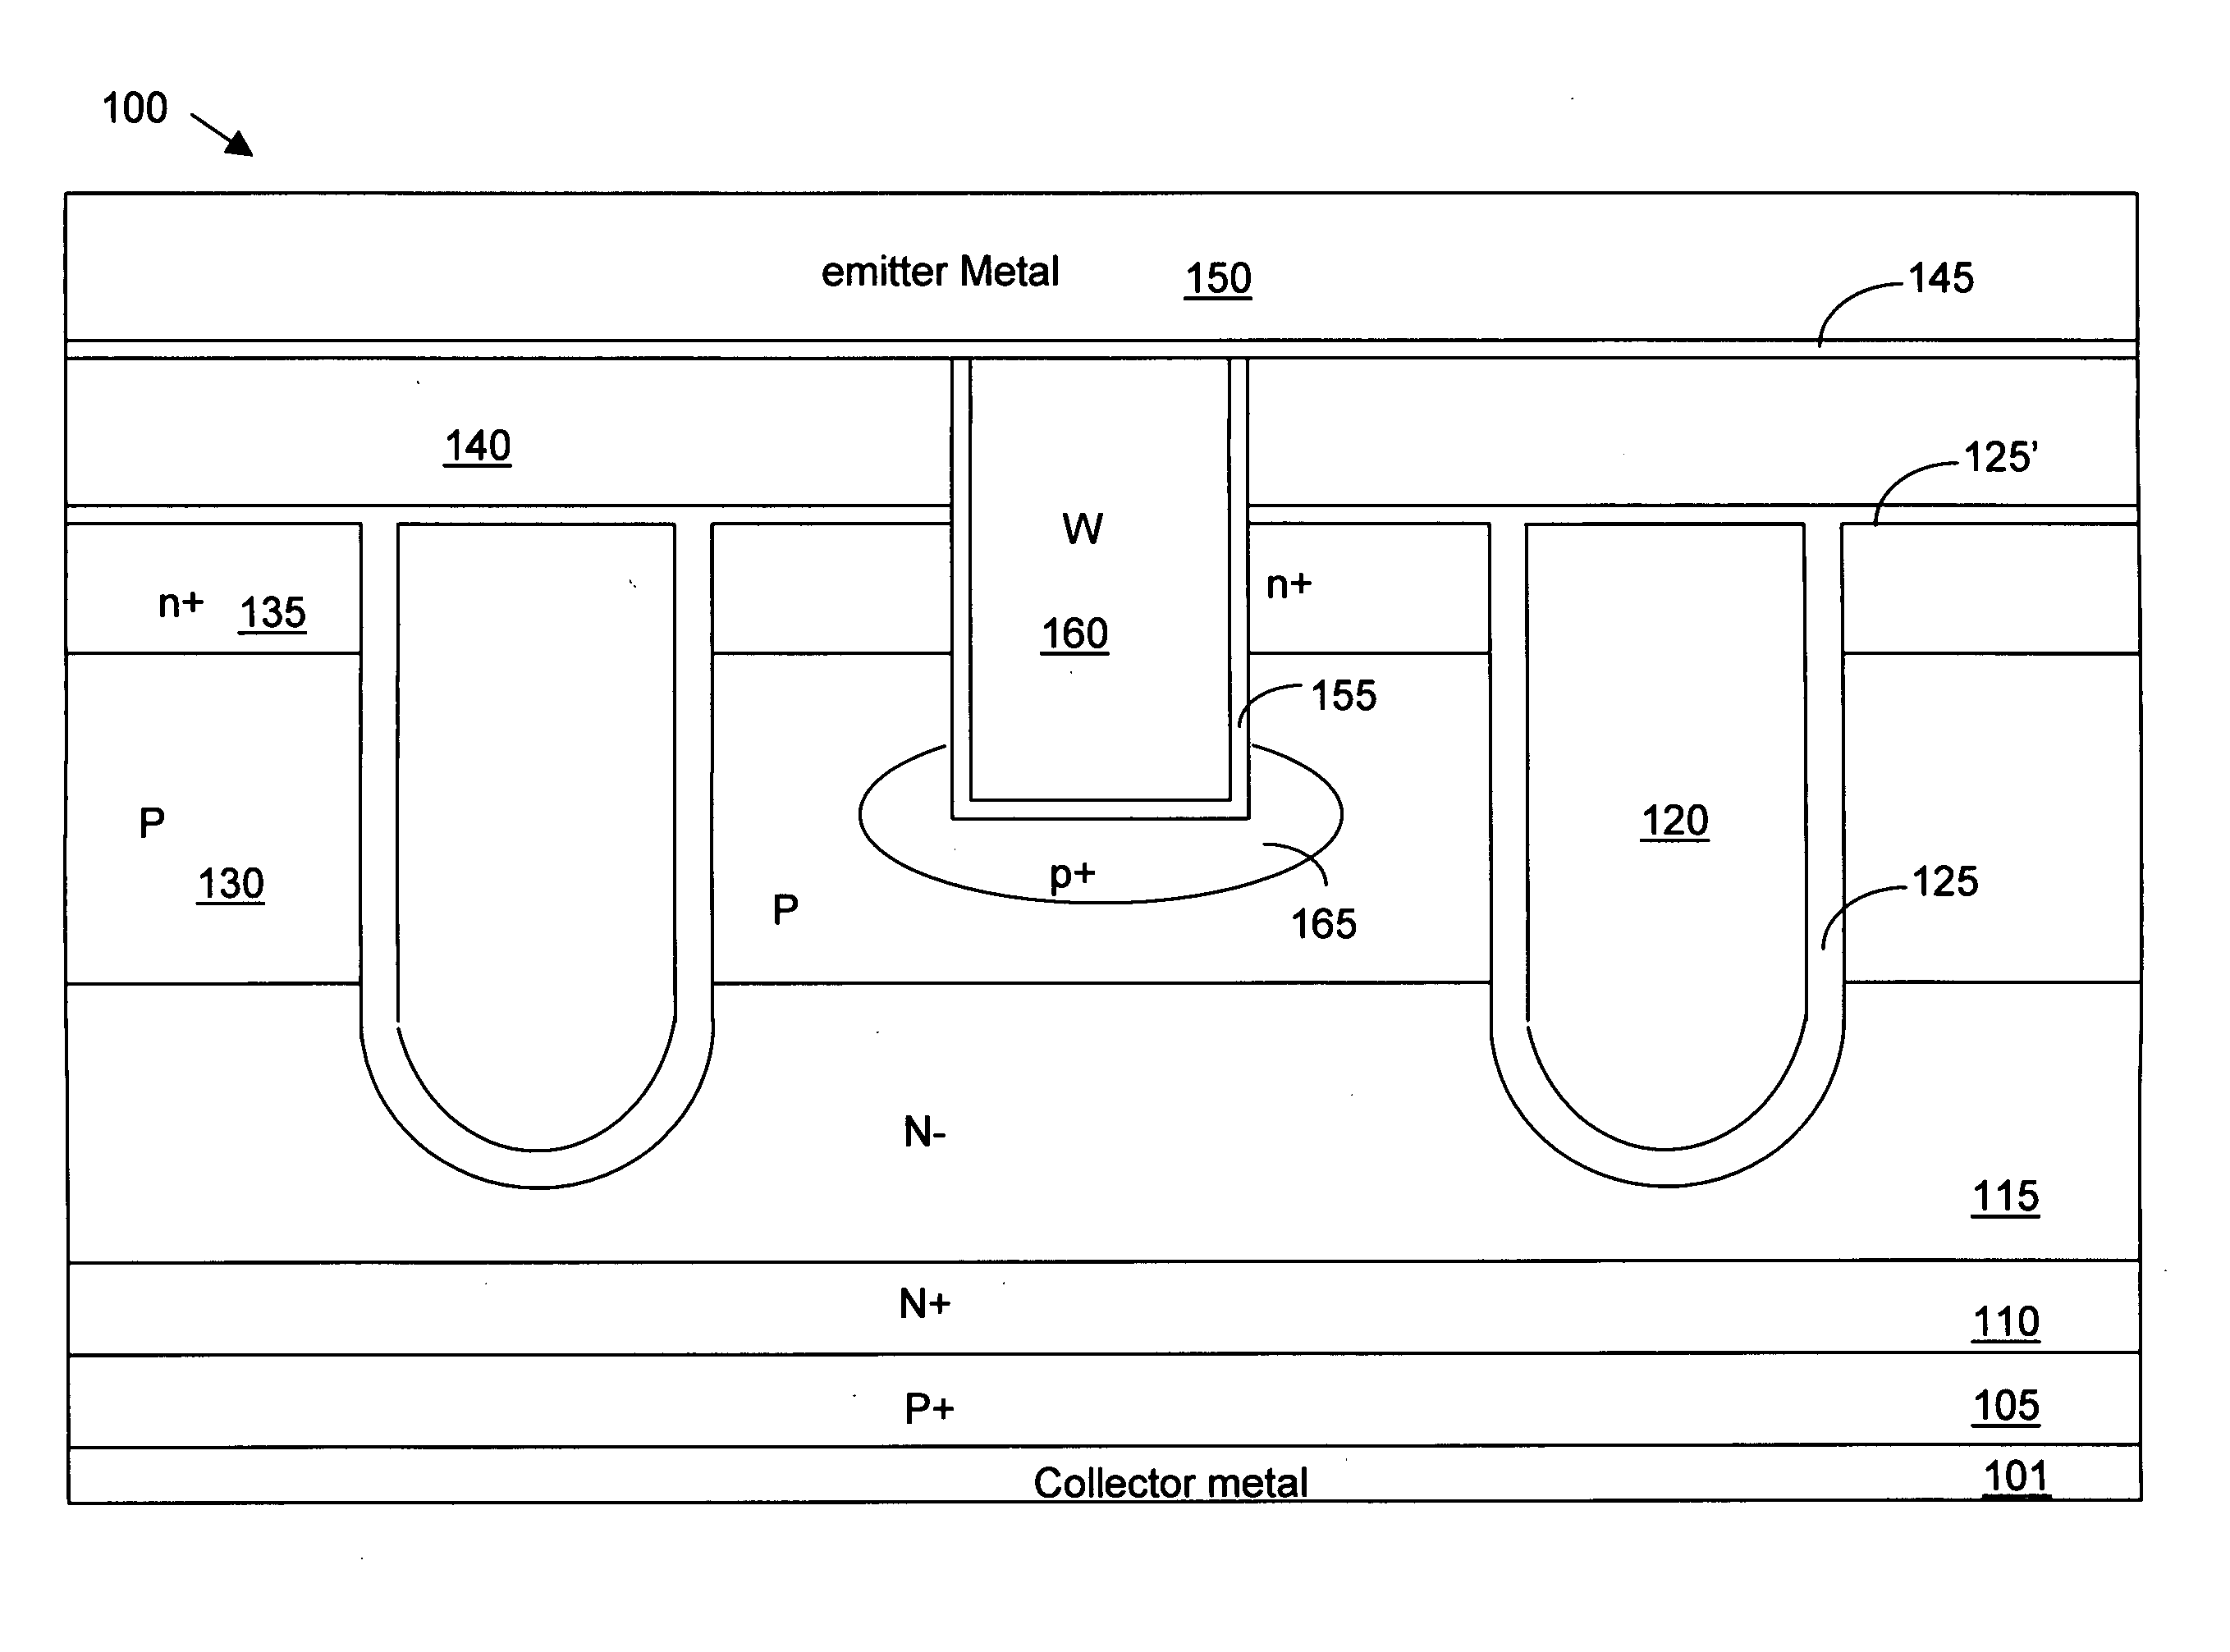 Trench insulated gate bipolar transistor (GBT) with improved emitter-base contacts and metal schemes